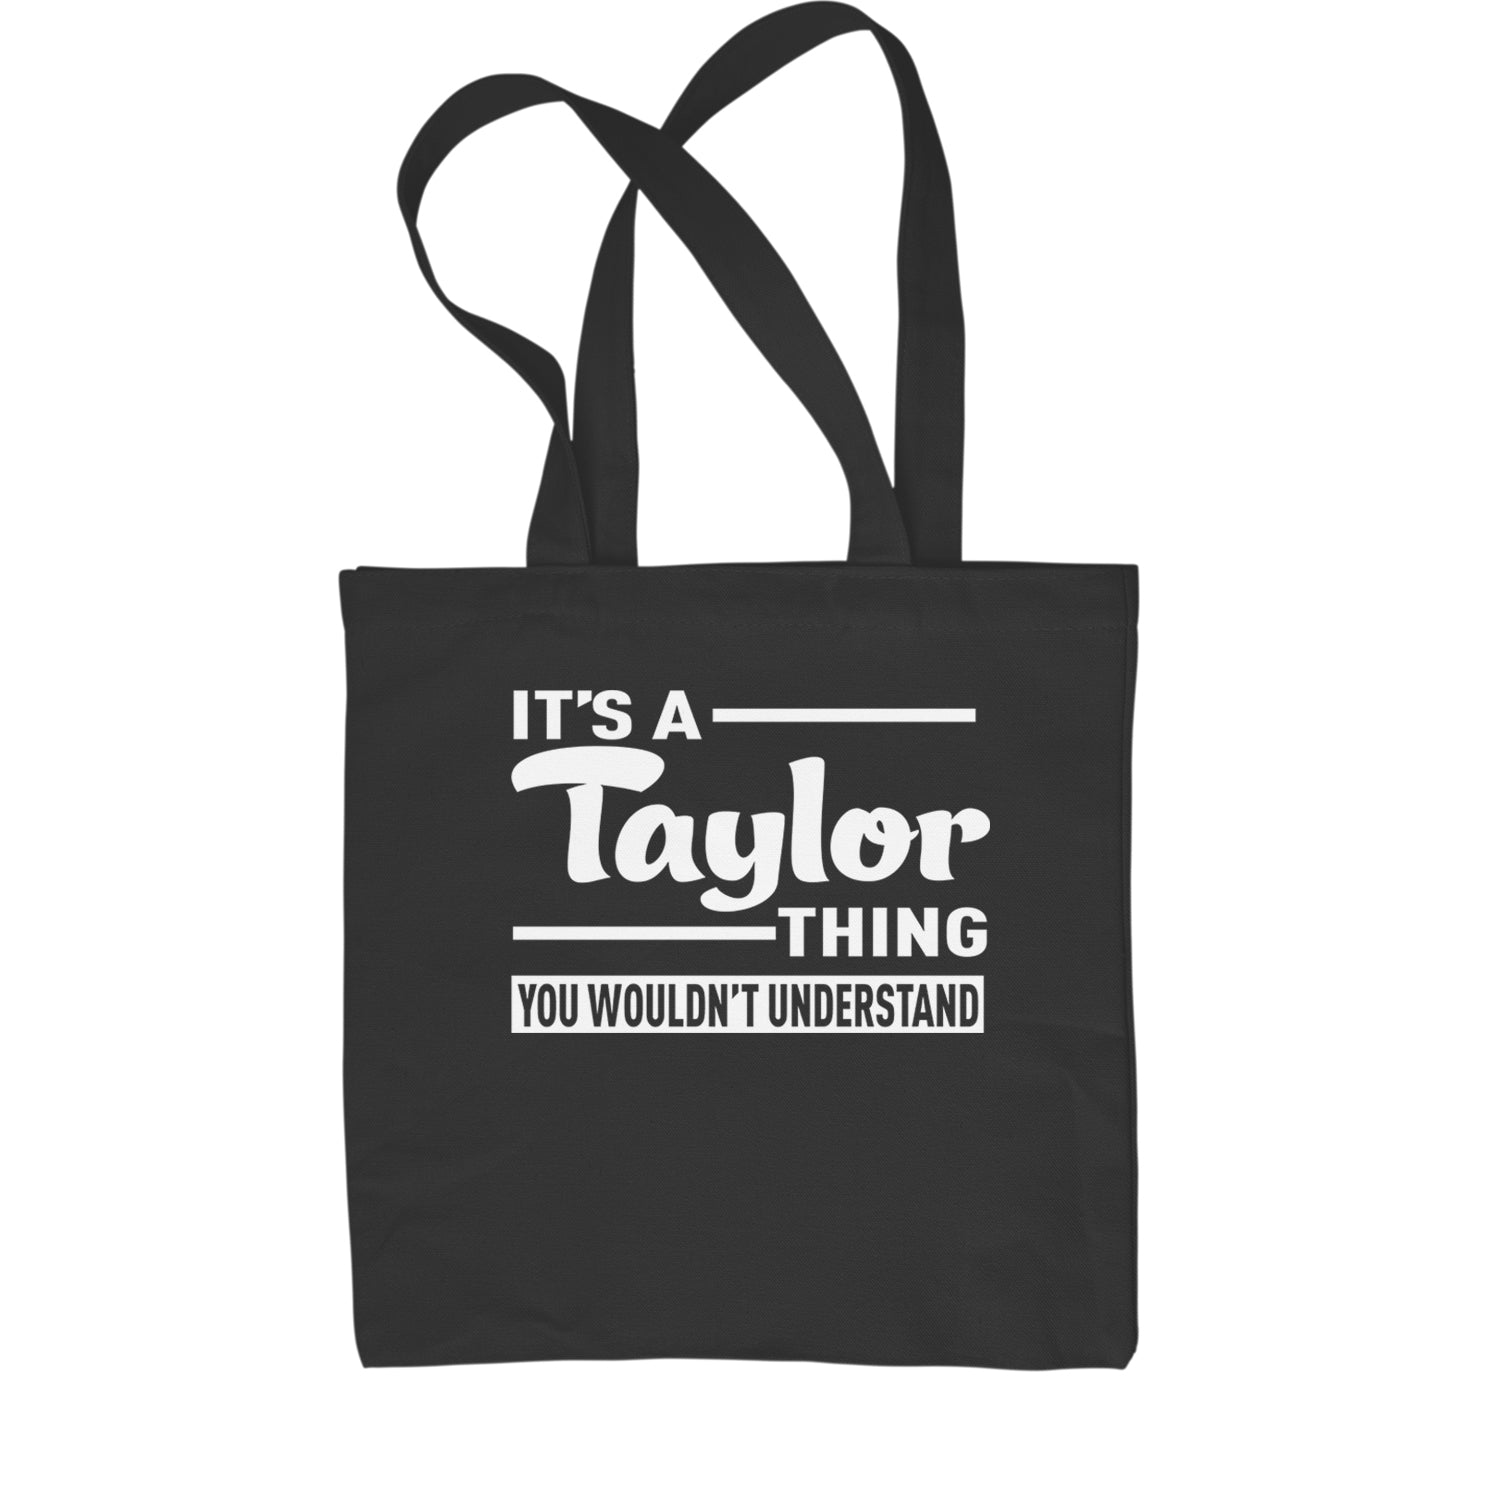 It's A Taylor Thing, You Wouldn't Understand TTPD Shopping Tote Bag